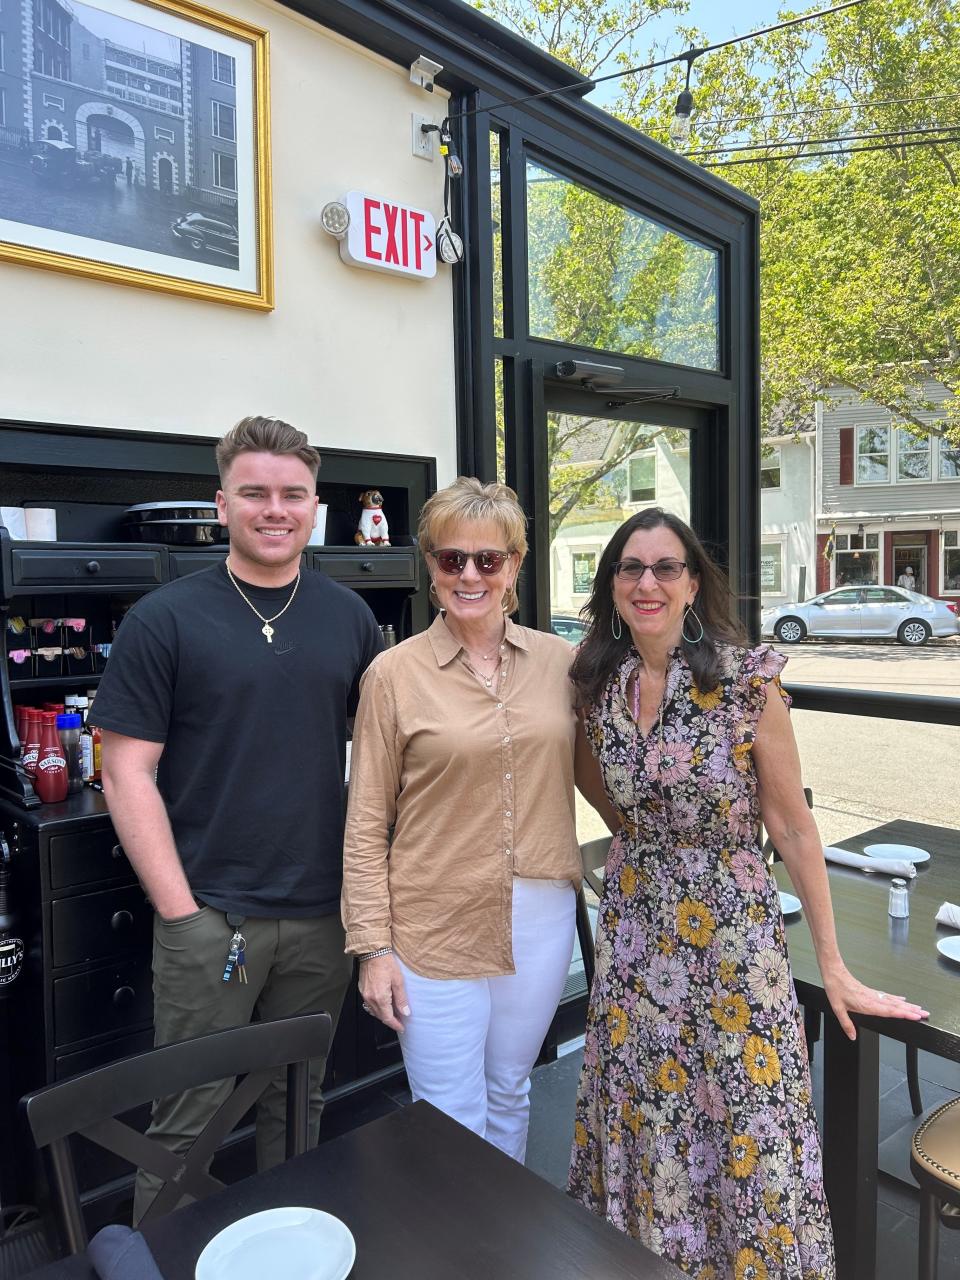 Lohud Food & Dining Reporter Jeanne Muchnick, far right, with Reilly's Public House Owners Anne Reilly, center, and Kevin Reilly, left. The restaurant is in Piermont, NY. Photographed June 2023